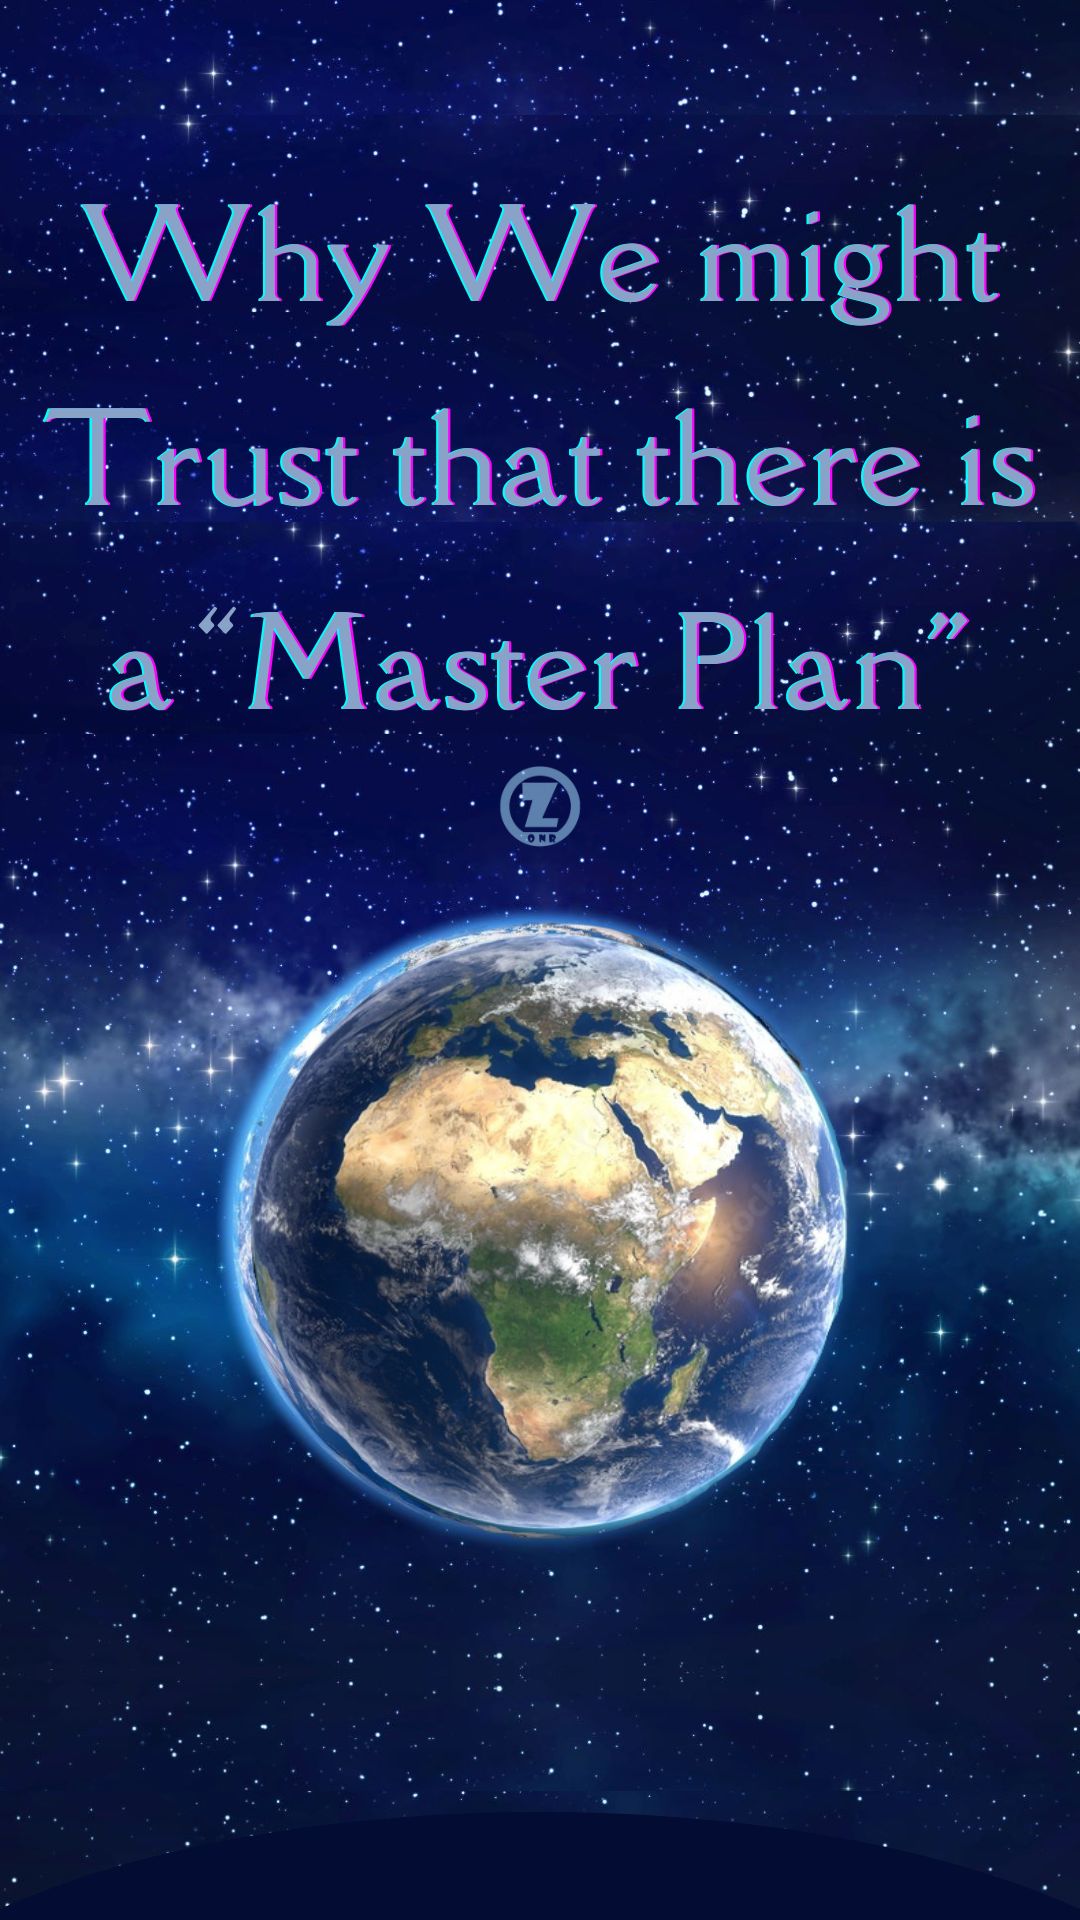 You are currently viewing Why We might Trust that there is a “Master Plan” – Step 1